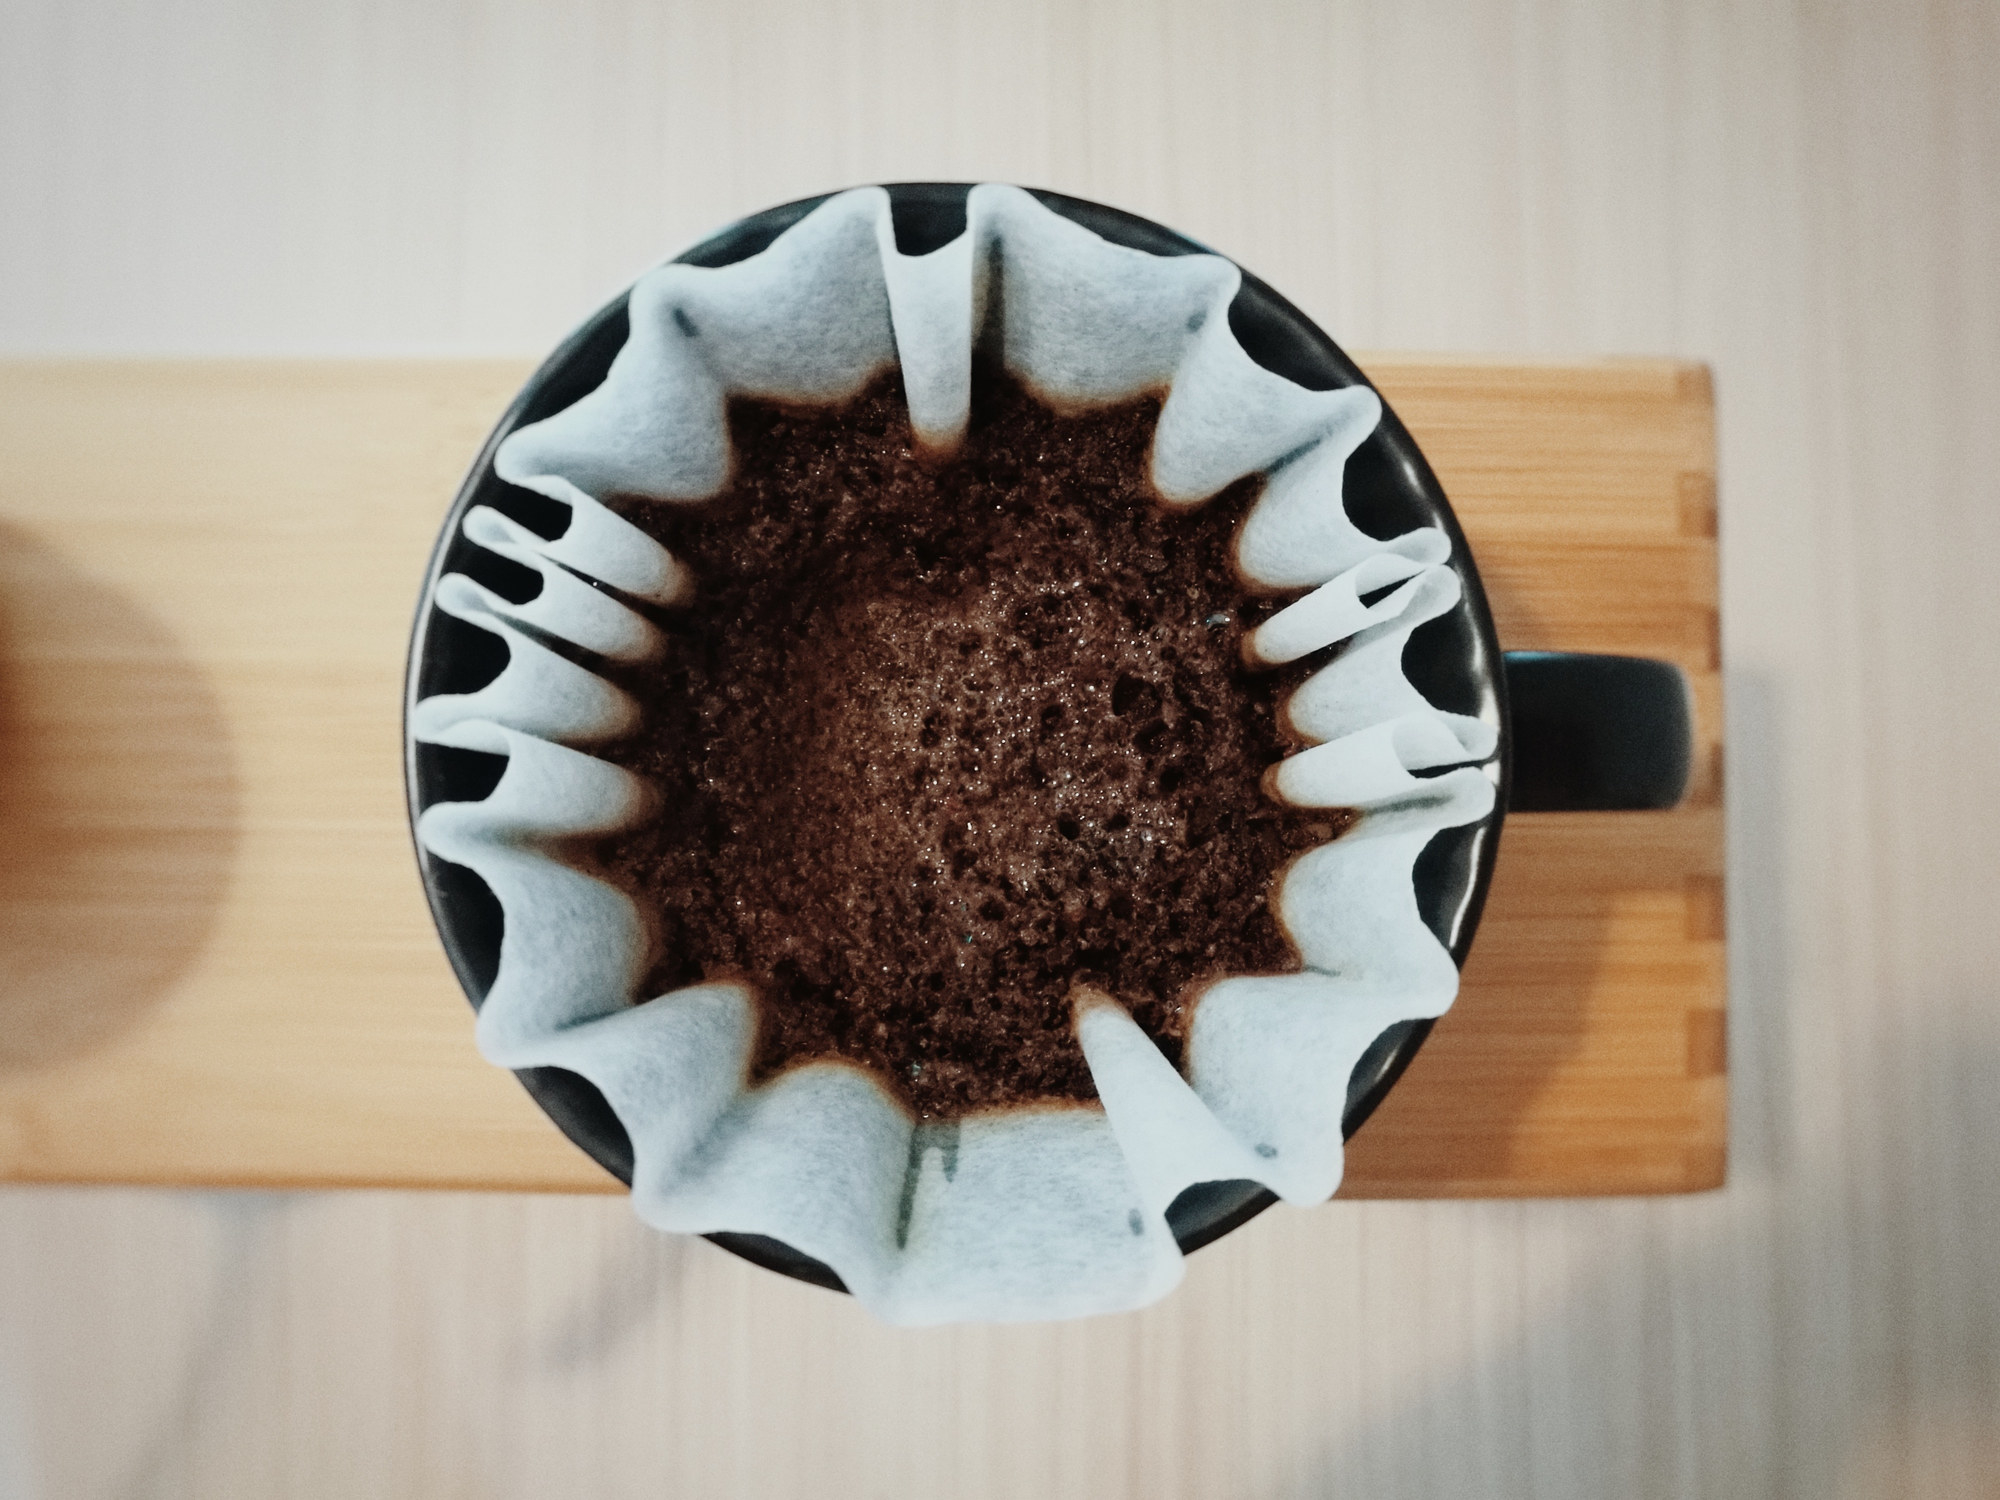 Ground coffee in a filter